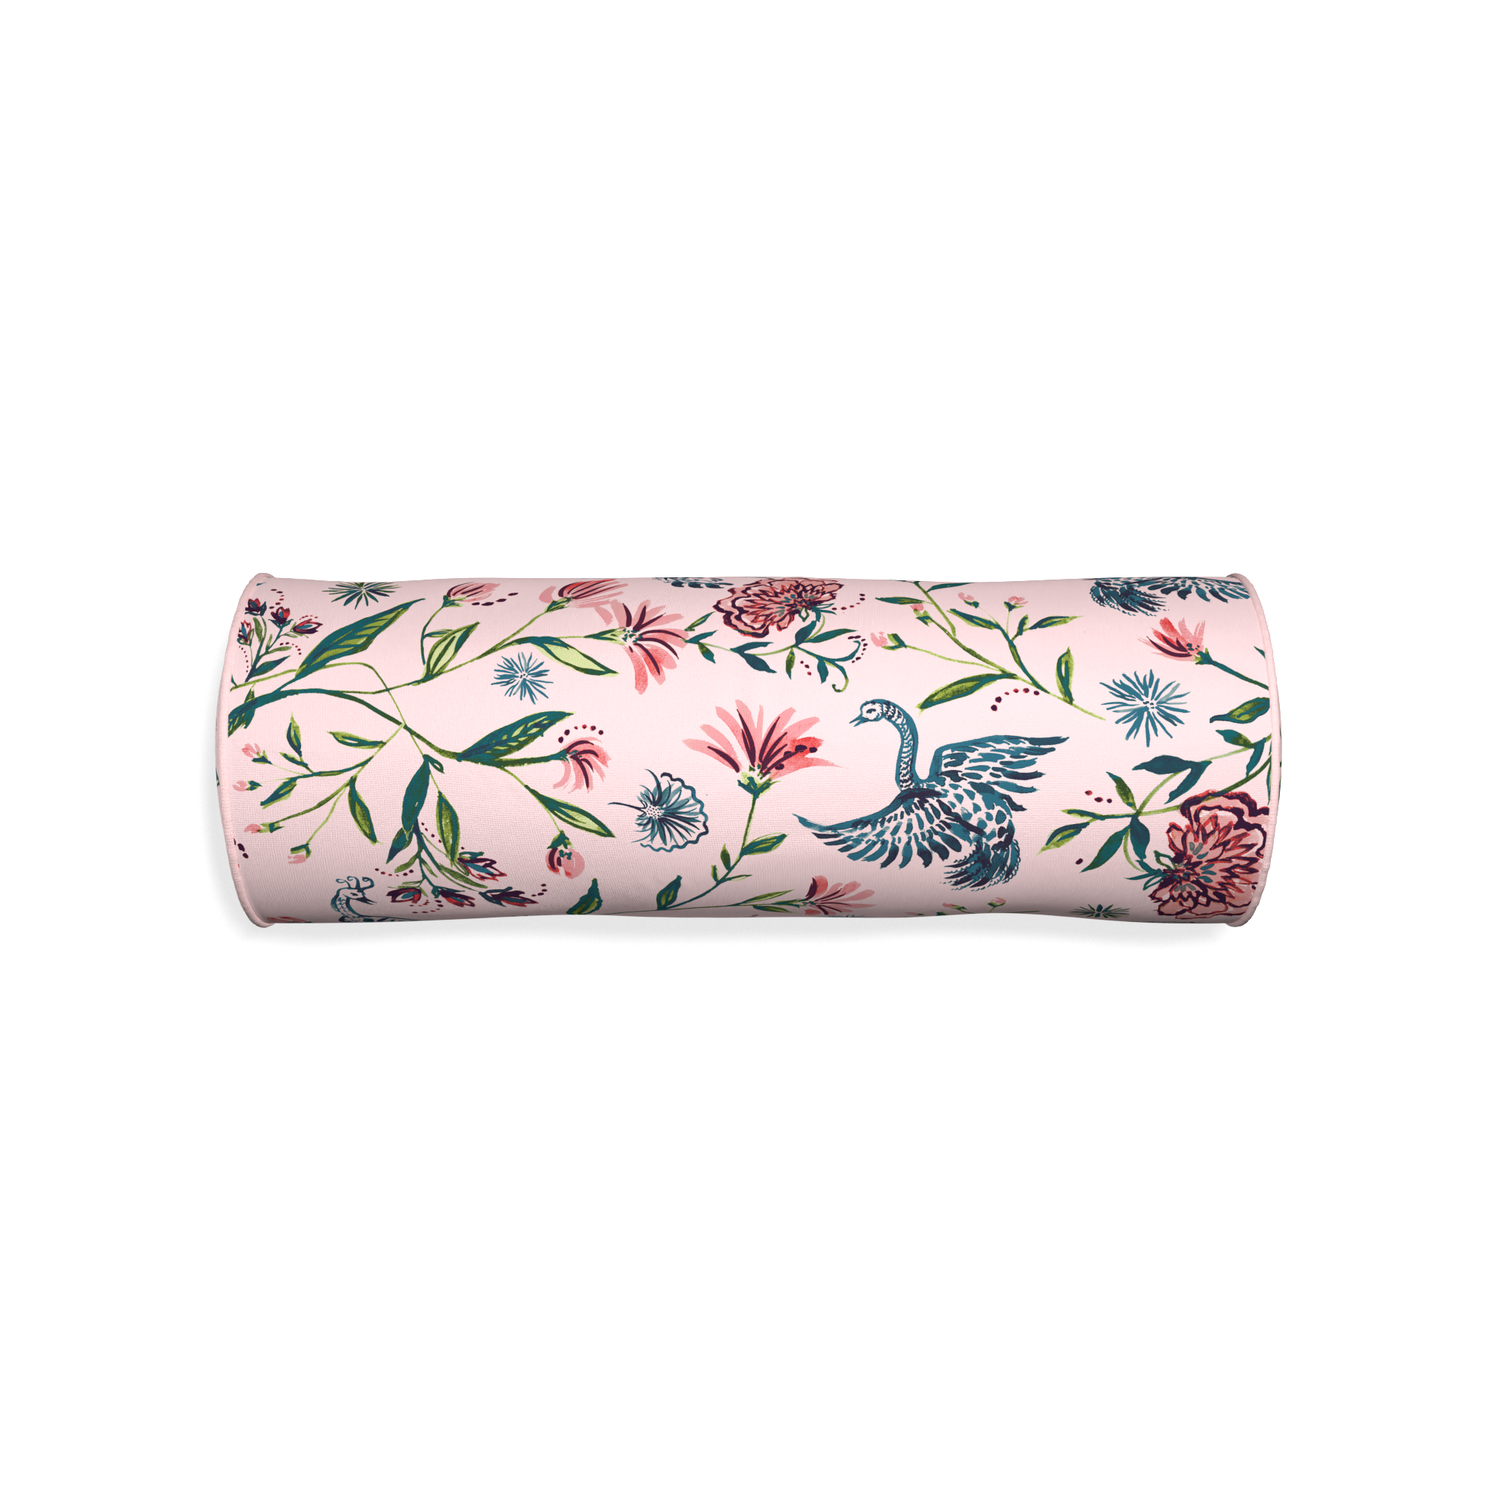 Bolster daphne rose custom rose chinoiseriepillow with petal piping on white background